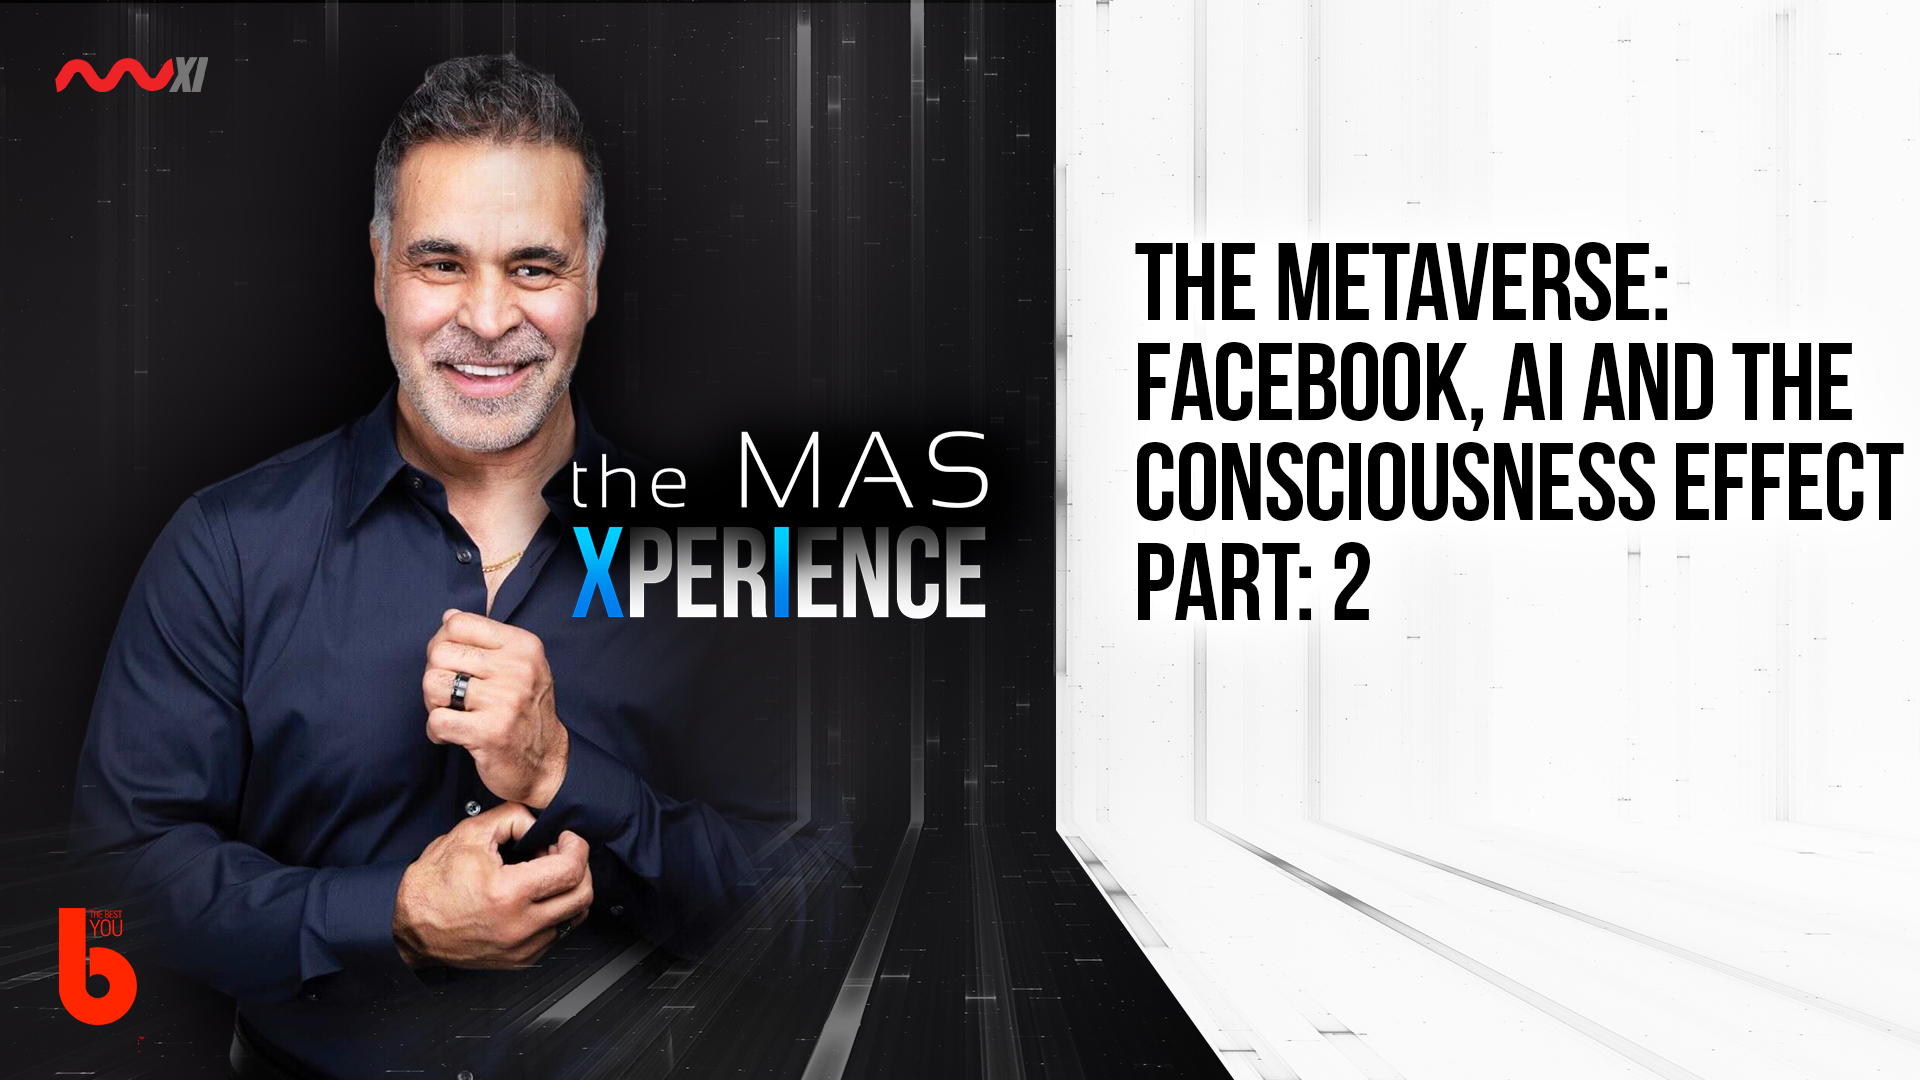 The Metaverse: Facebook, AI and the Consciousness Effect, Part 2